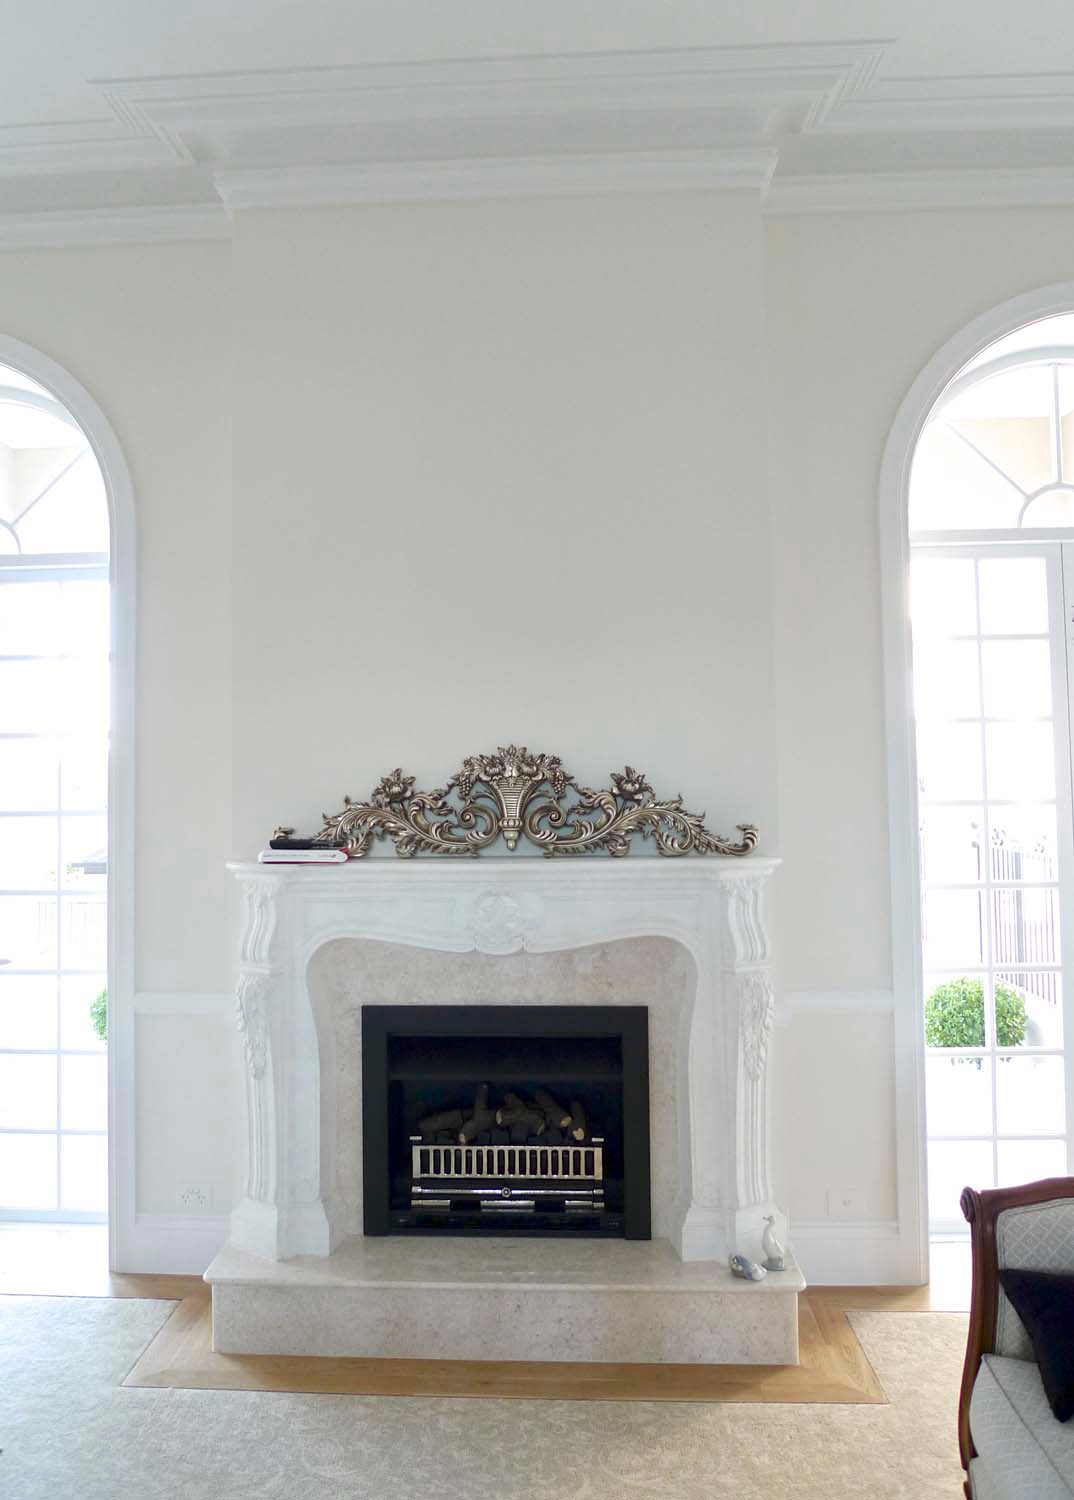 10 Custom designed and made fireplace in marble and french style